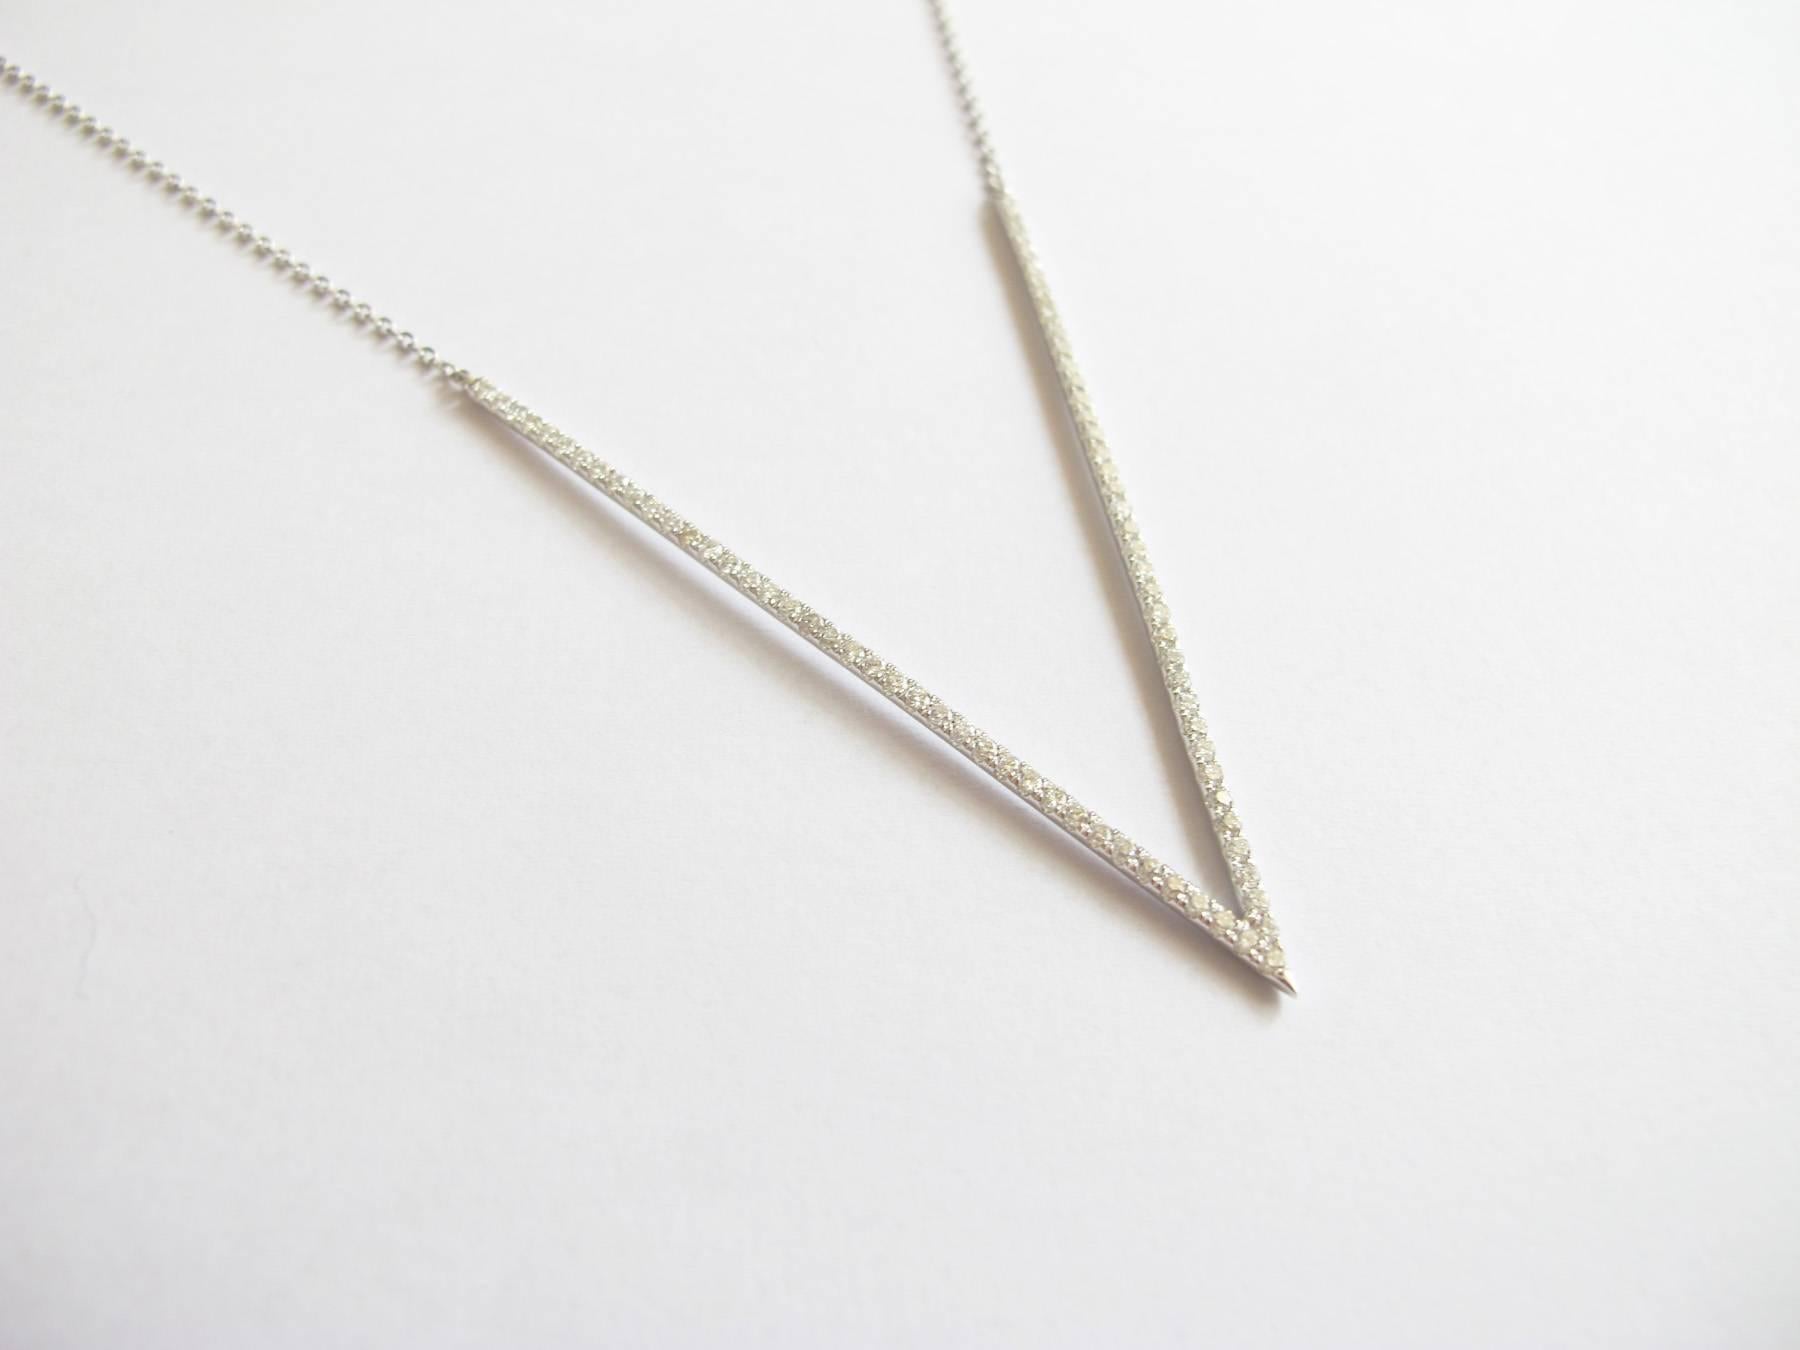 This 18K white gold diamond 'V' necklace is clean and minimalist, and will be a subtle addition to any modern wardrobe.  

Necklace length: 19 inches with ability to clasp at 18 inches and 18.5 inches
Diamond weight: 0.77ct
